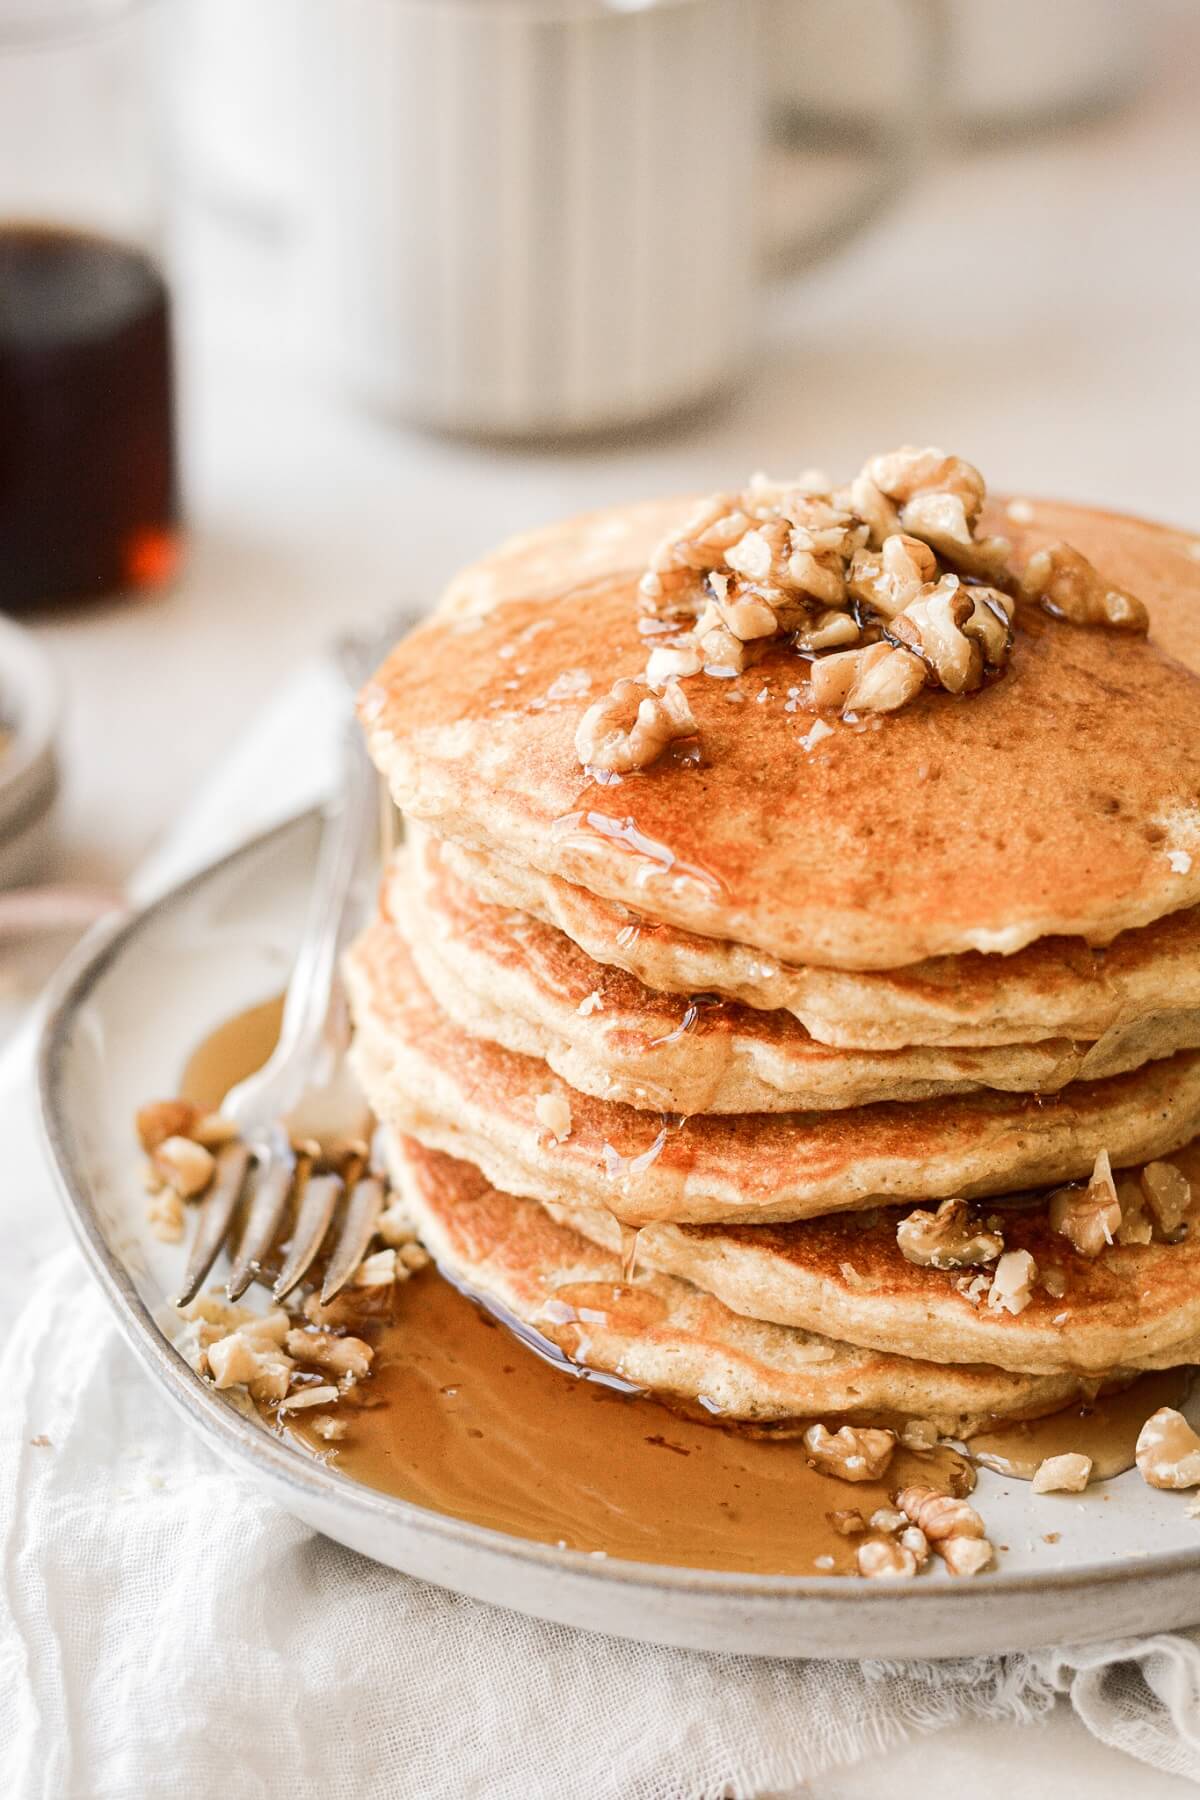 Stack of cornmeal pancakes with syrup and walnuts.